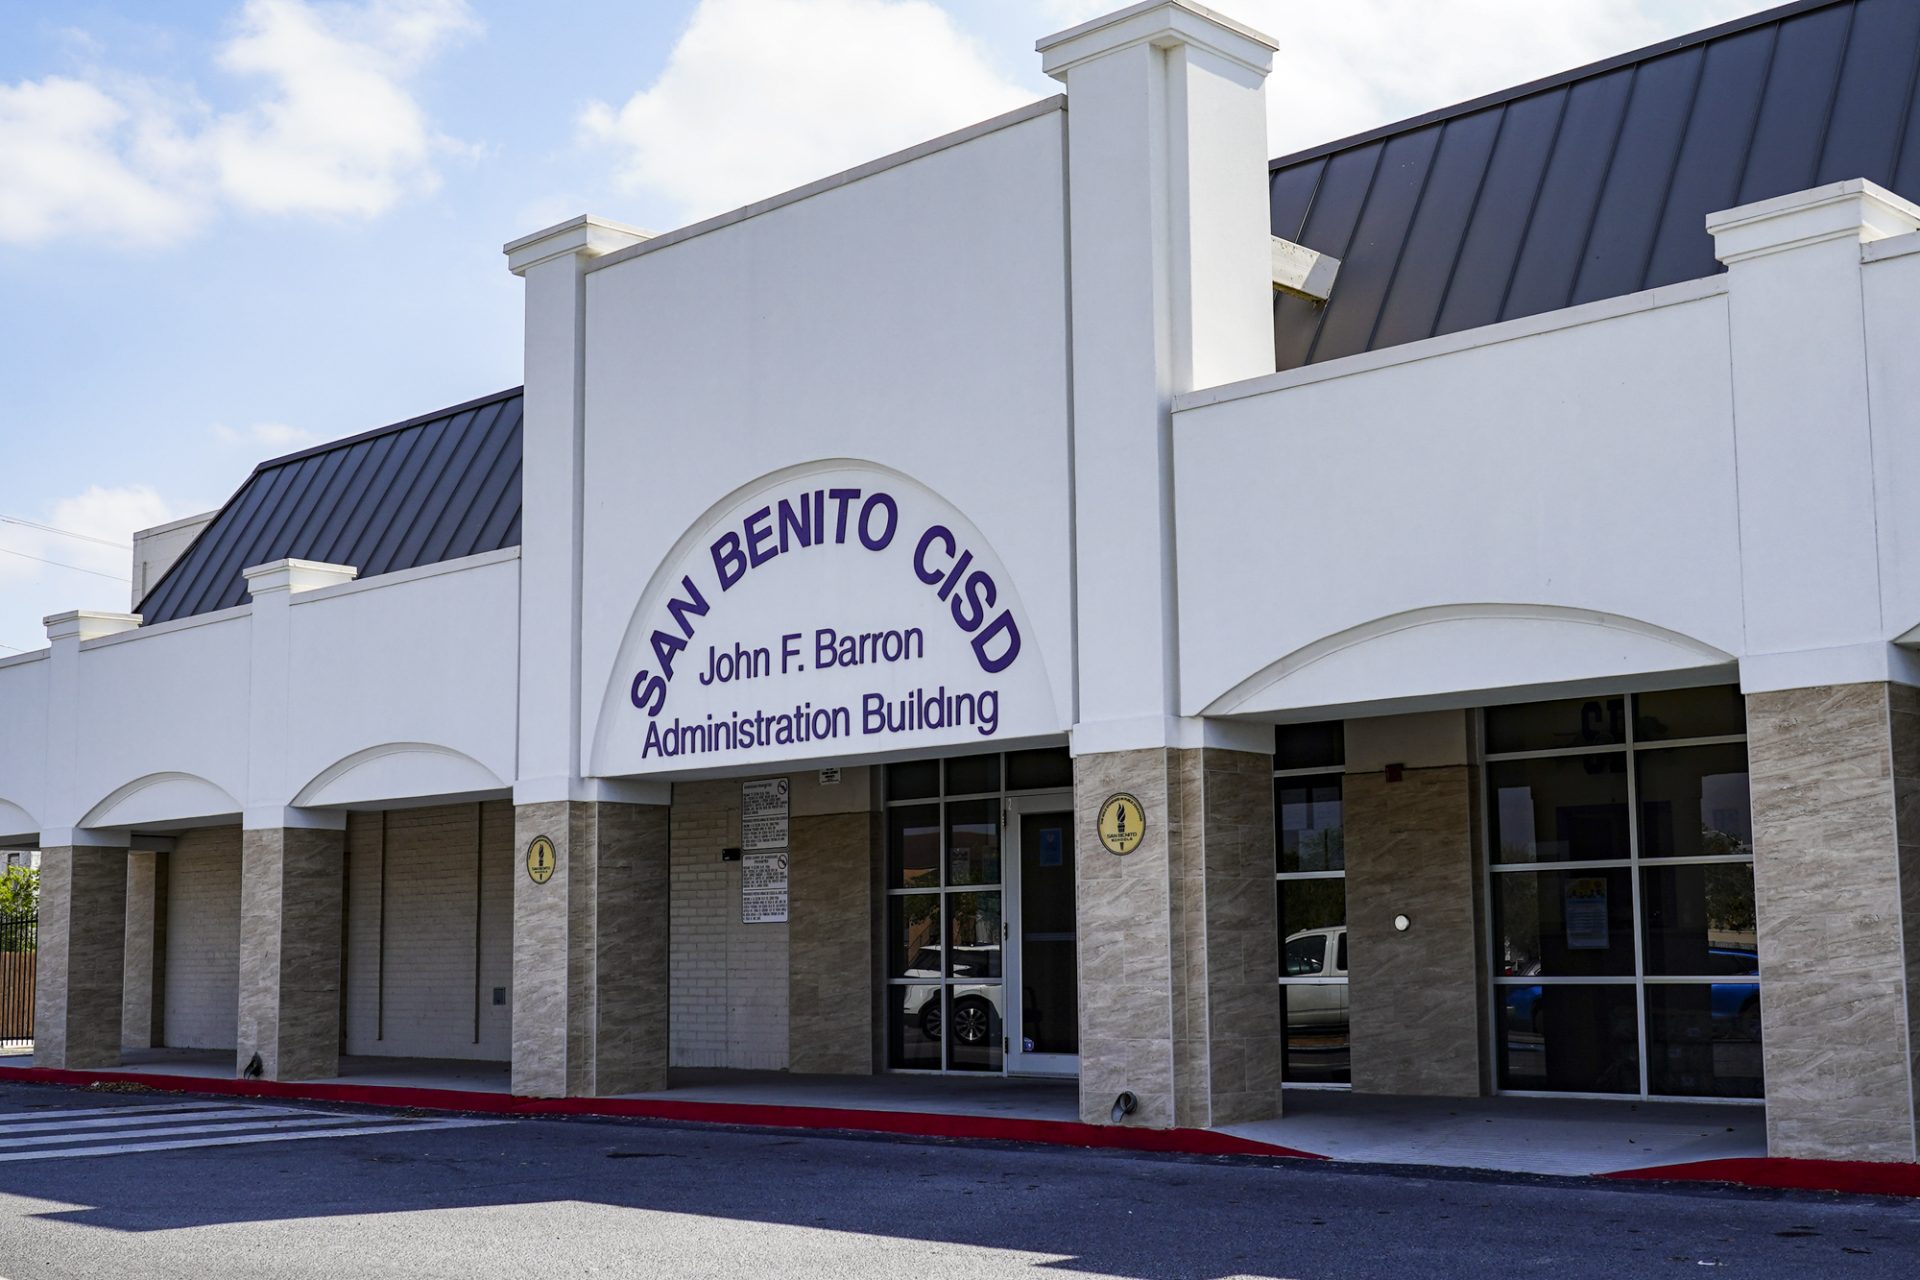 San Benito mass tuberculosis tests clear students, staff